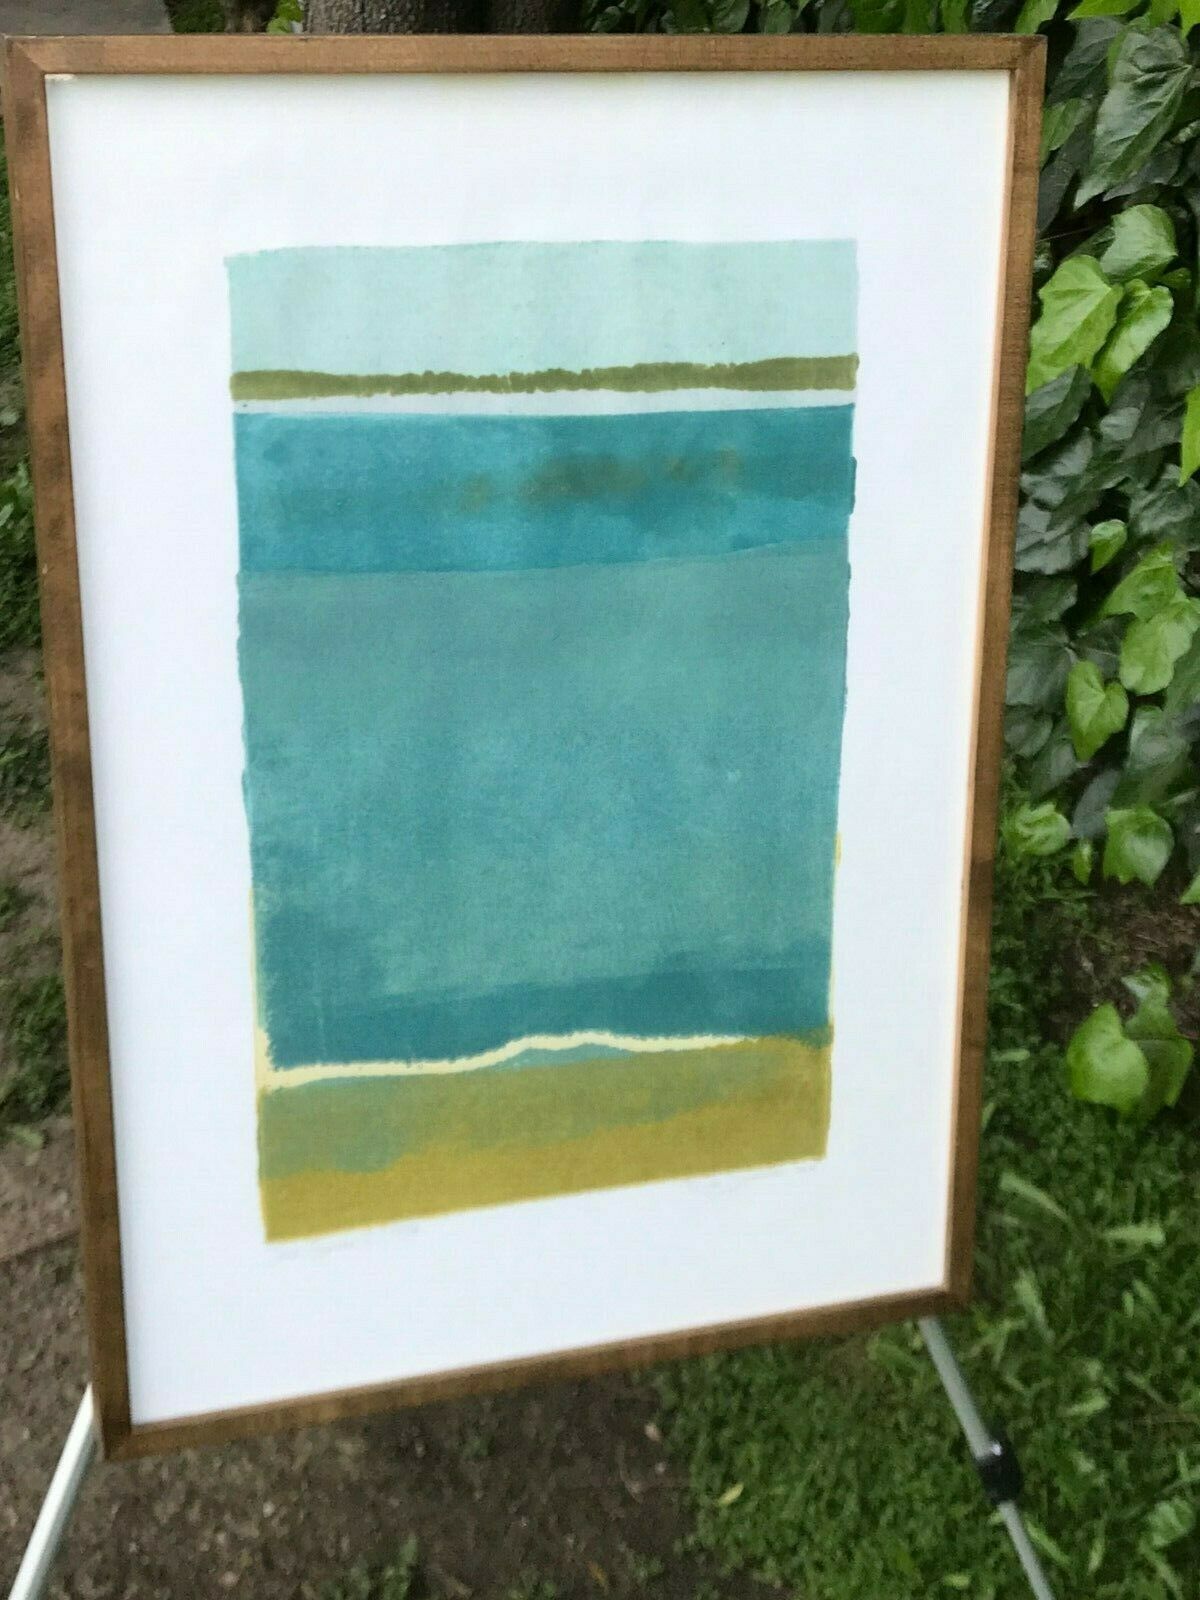 Primary image for ROB DELAMATER Vintage MODERN ABSTRACT CUBIST SEASCAPE ART SERIGRAPH Signed w/COA